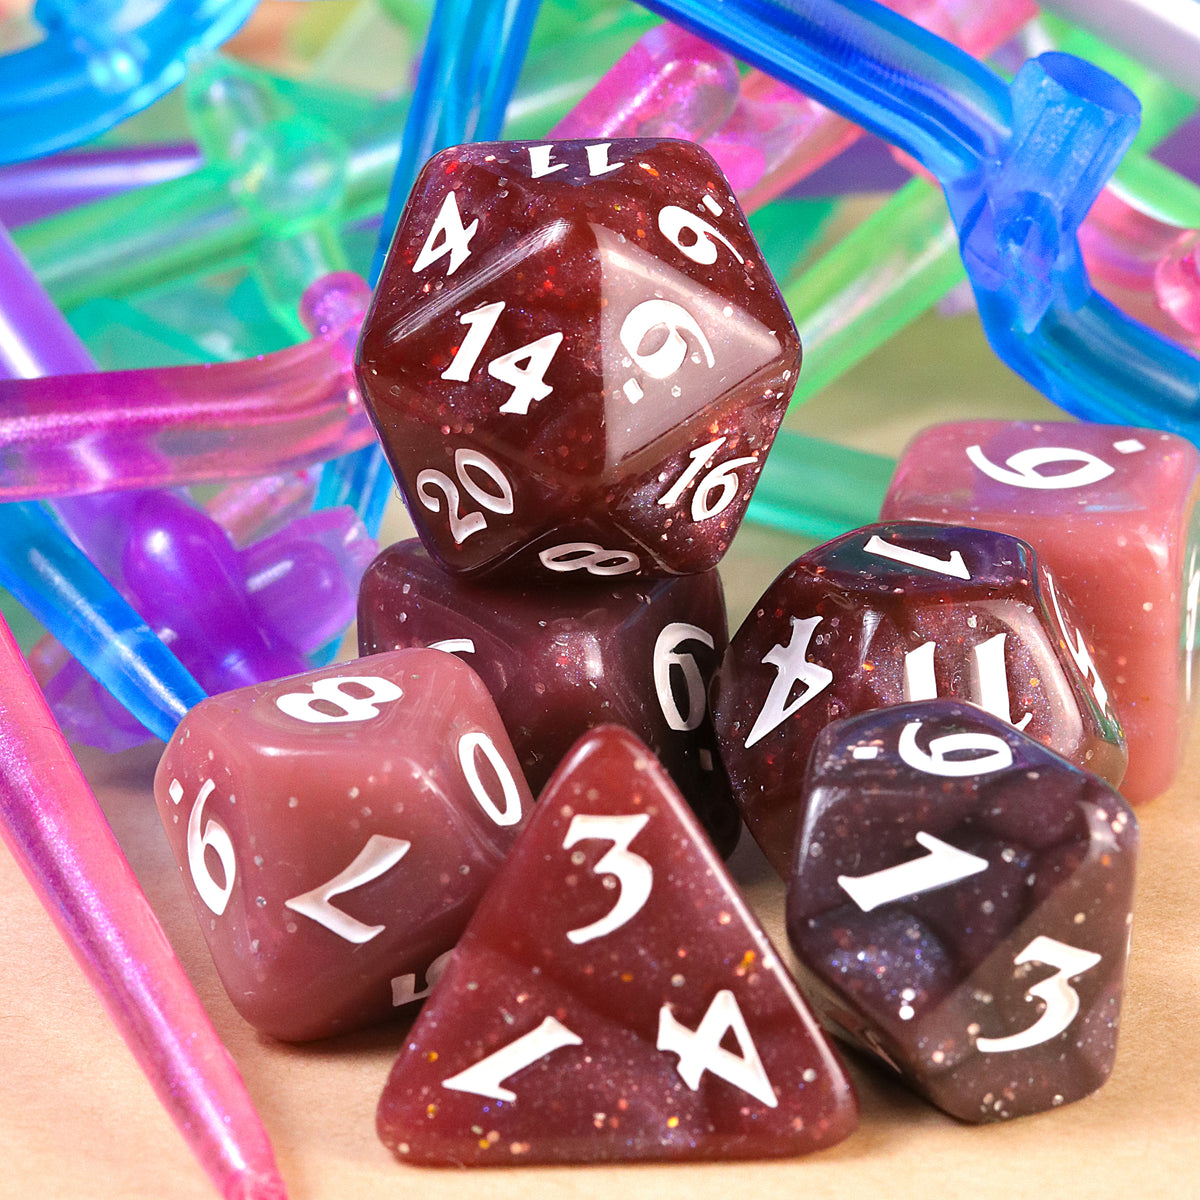 Rerolls - Recycled Dice